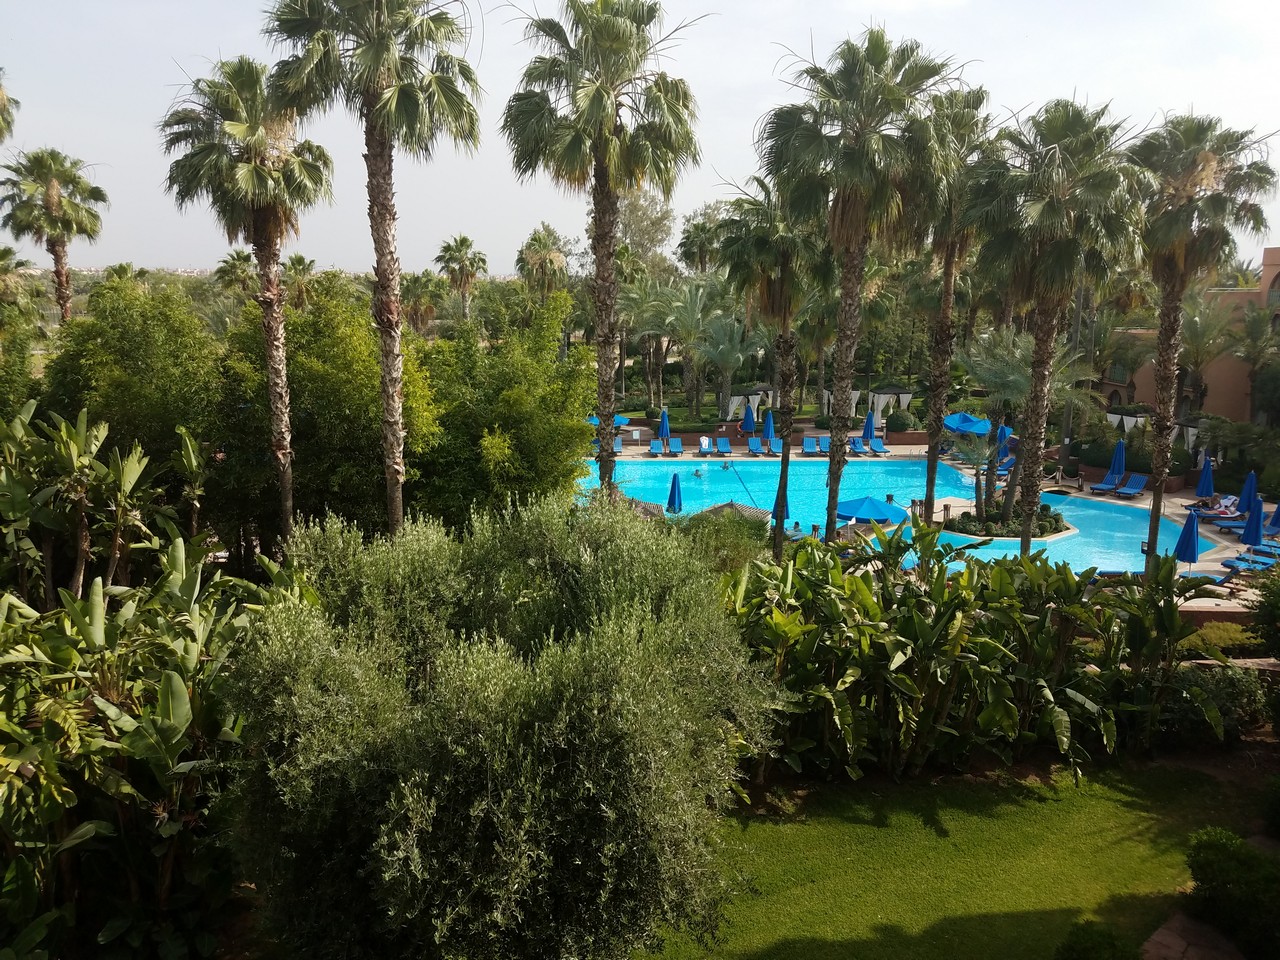 a pool with palm trees and bushes